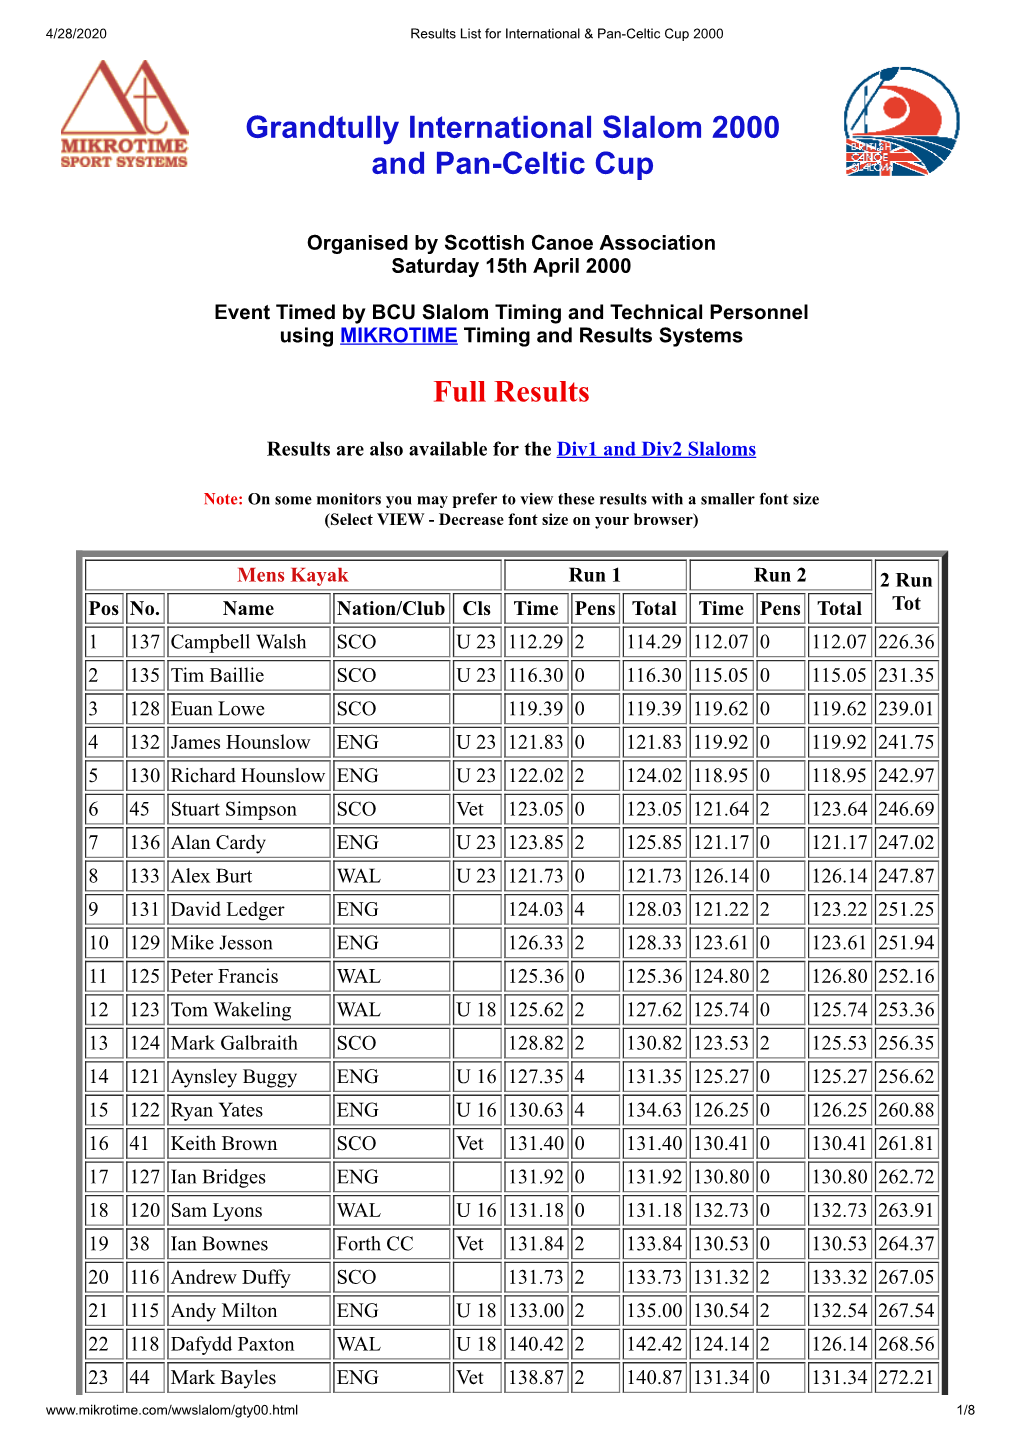 Grandtully International Slalom 2000 and Pan-Celtic Cup Full Results